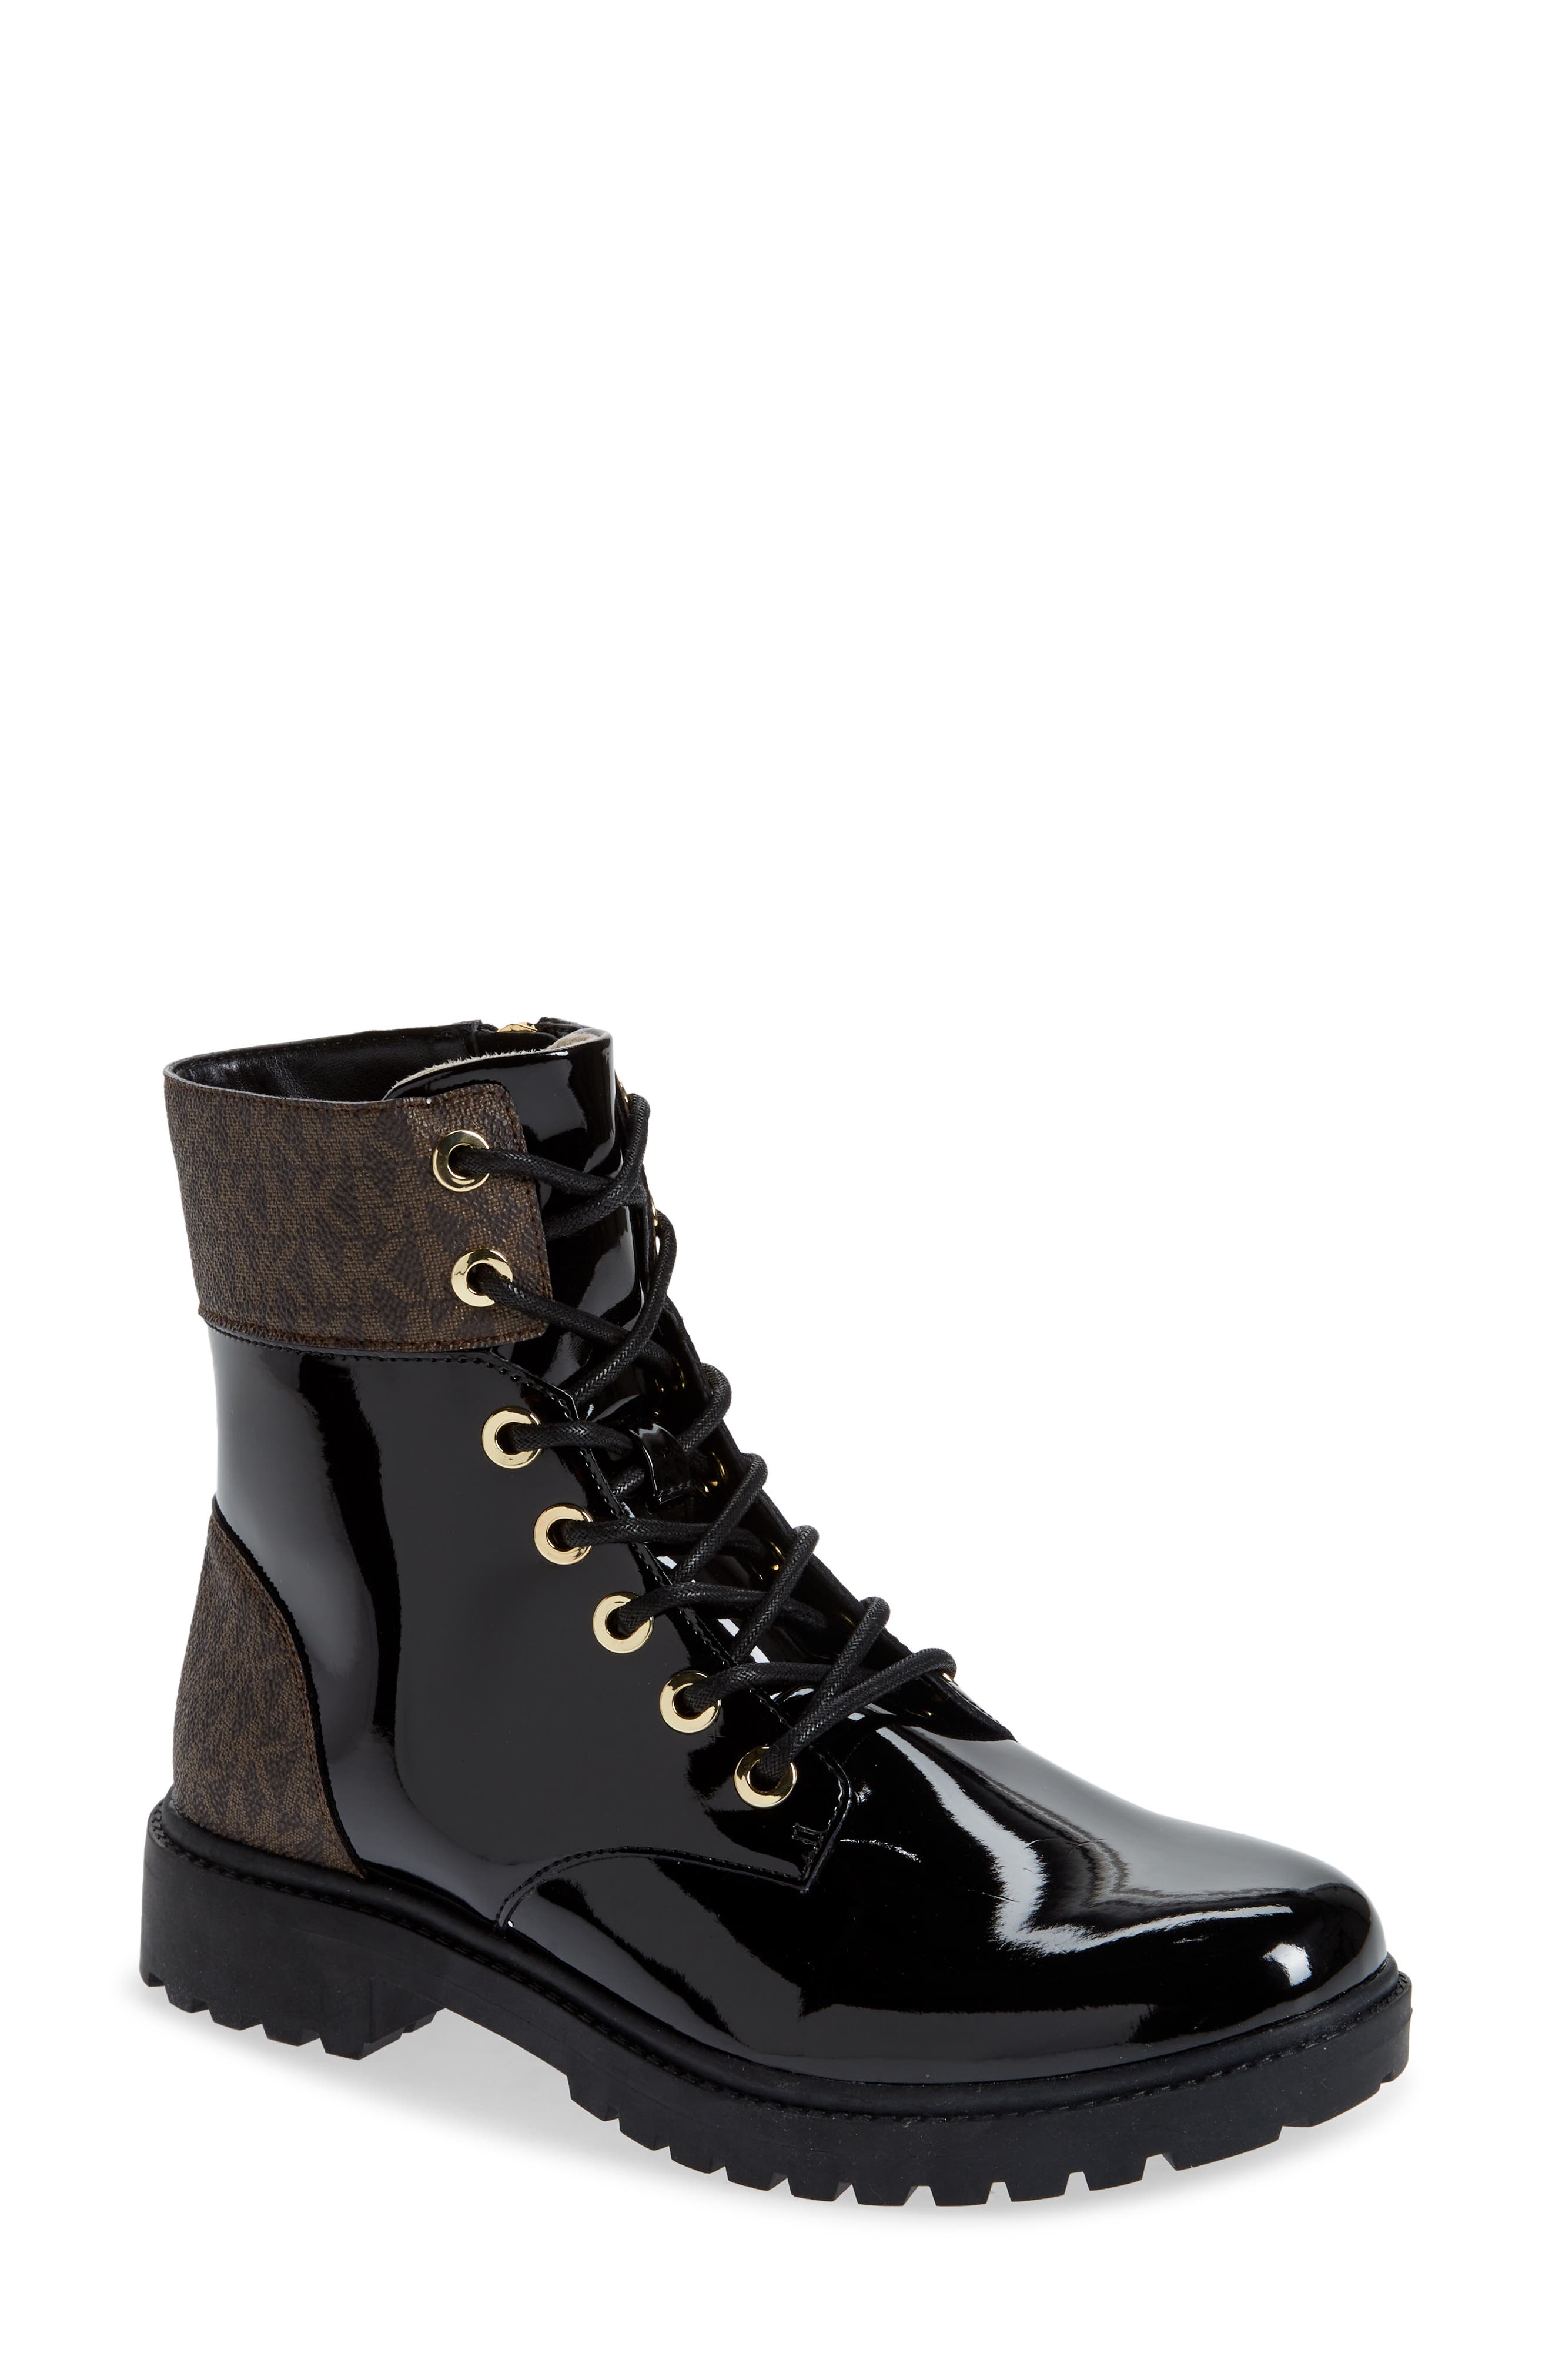 UPC 195512475559 product image for MICHAEL Michael Kors Alistair Lace-Up Boot in Black/Brown at Nordstrom, Size 8 | upcitemdb.com